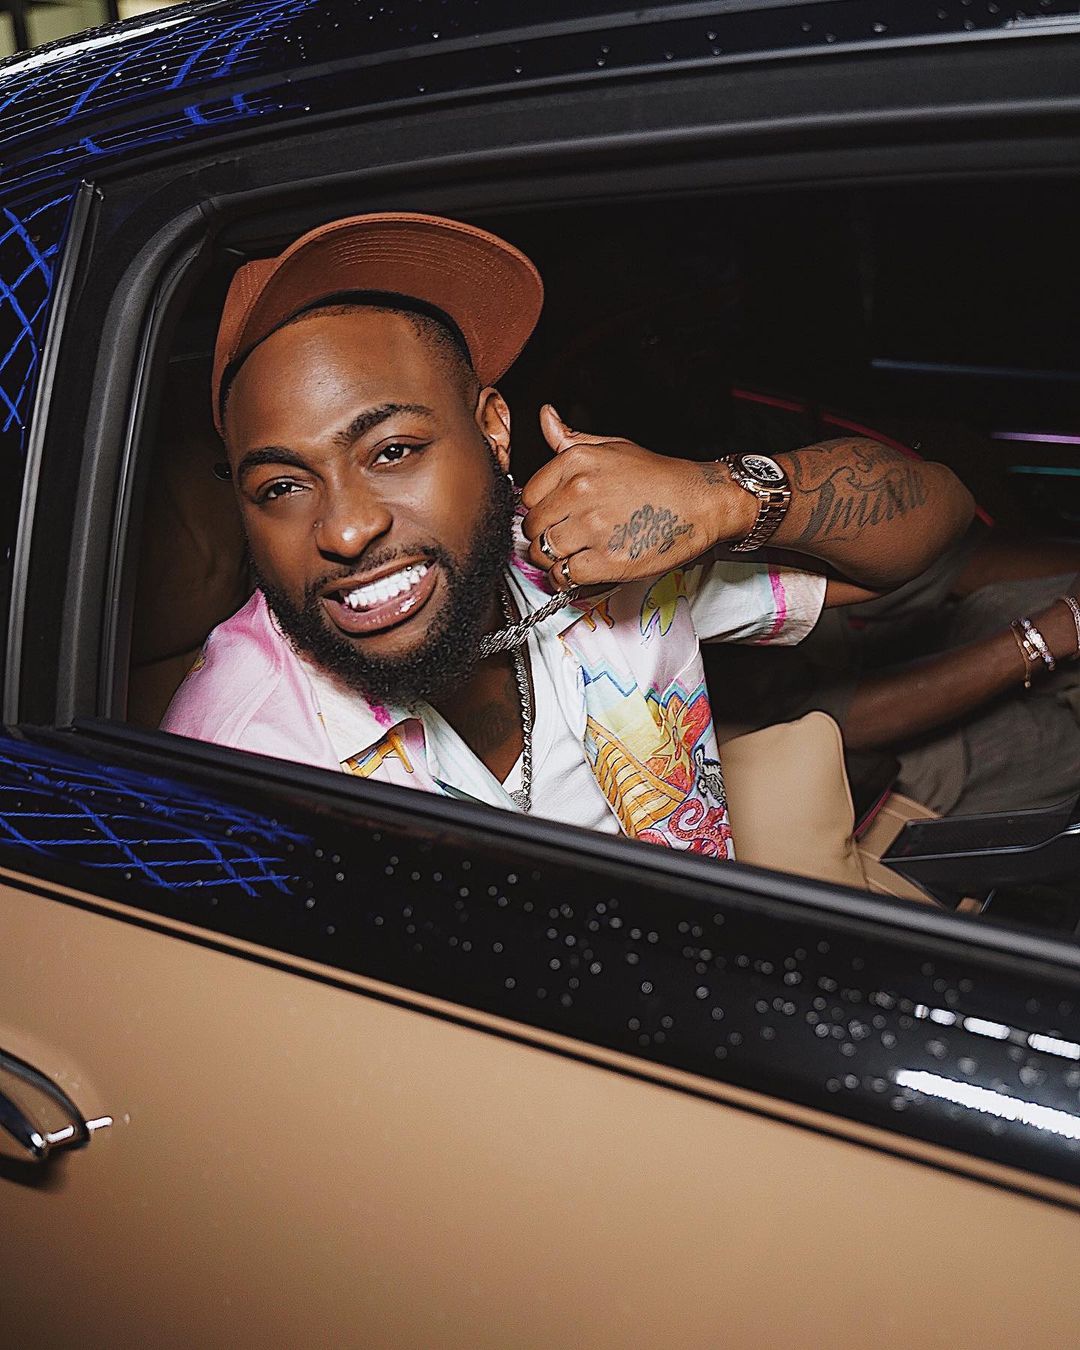 "I appreciate everything happening around me; I'm happy" – Davido thanks fans for support